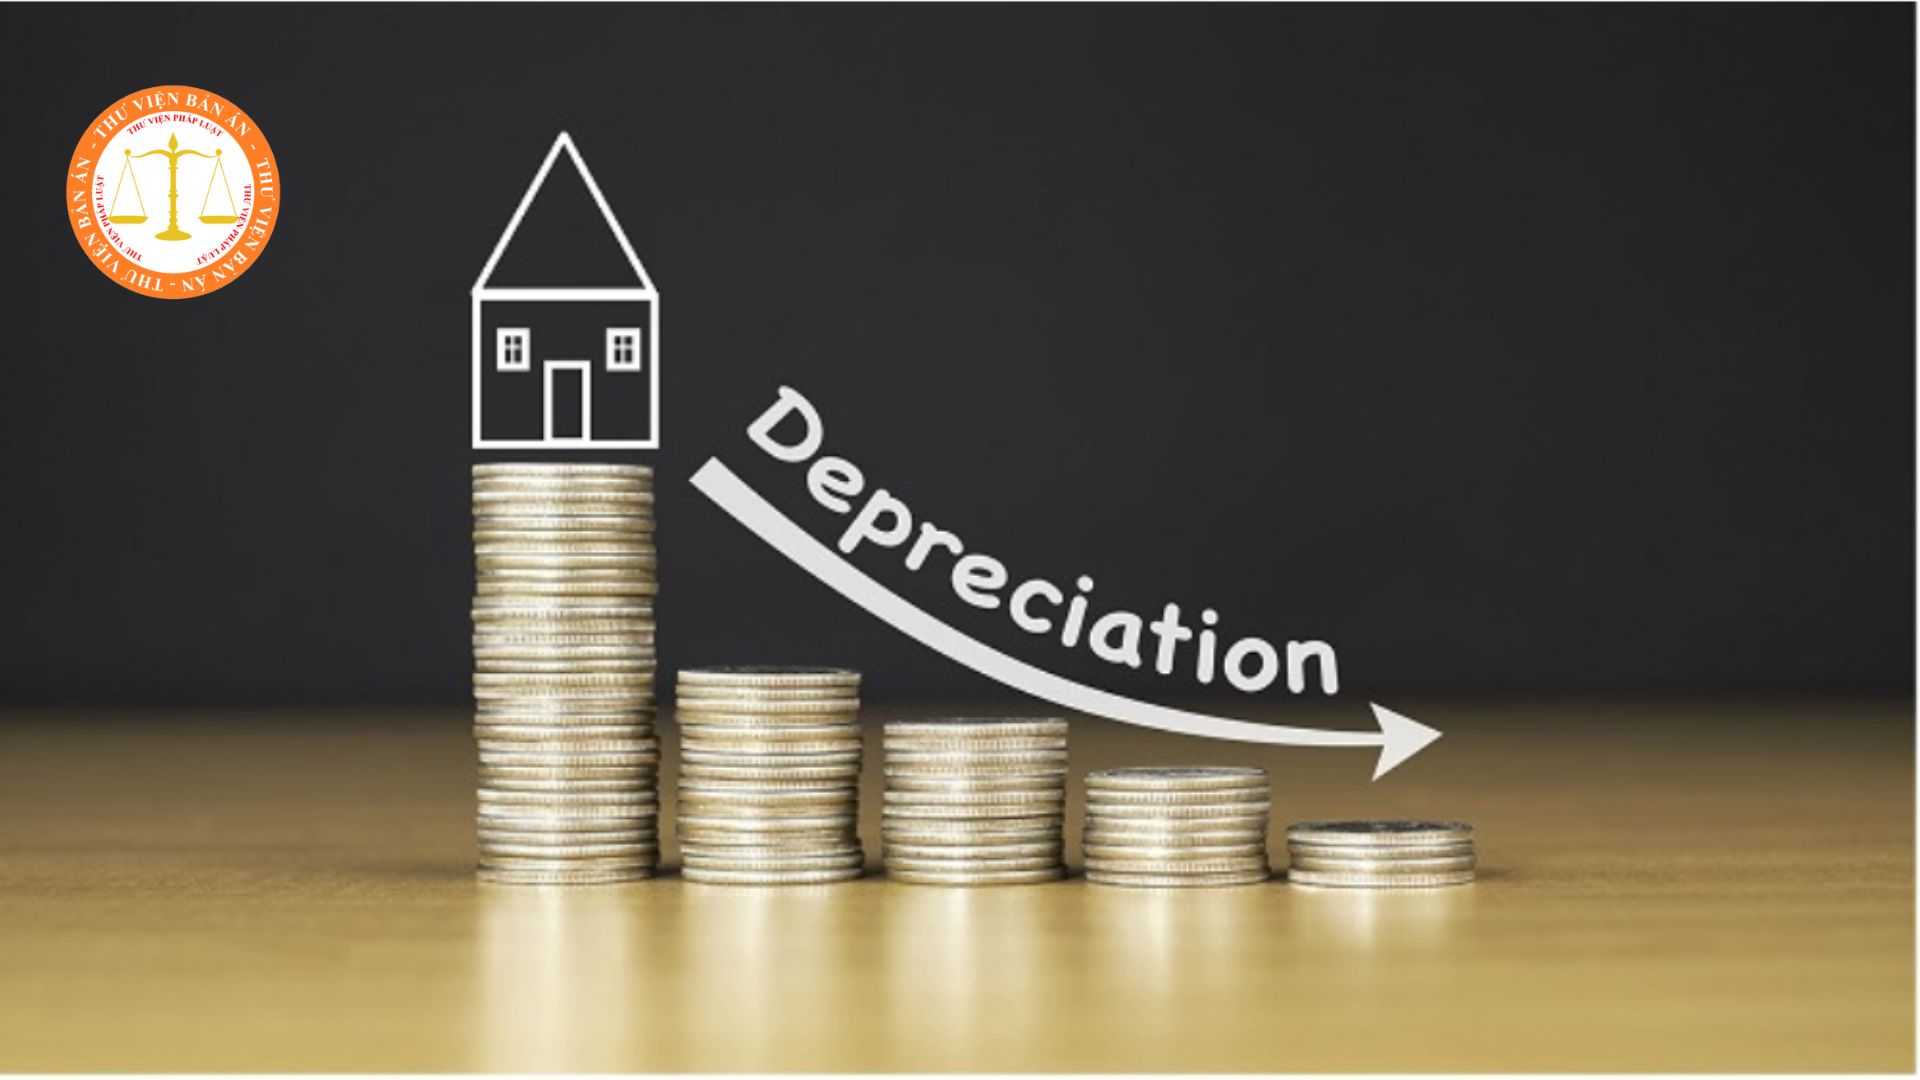 What are the types of fixed assets that do not need to be depreciated in Vietnam? 